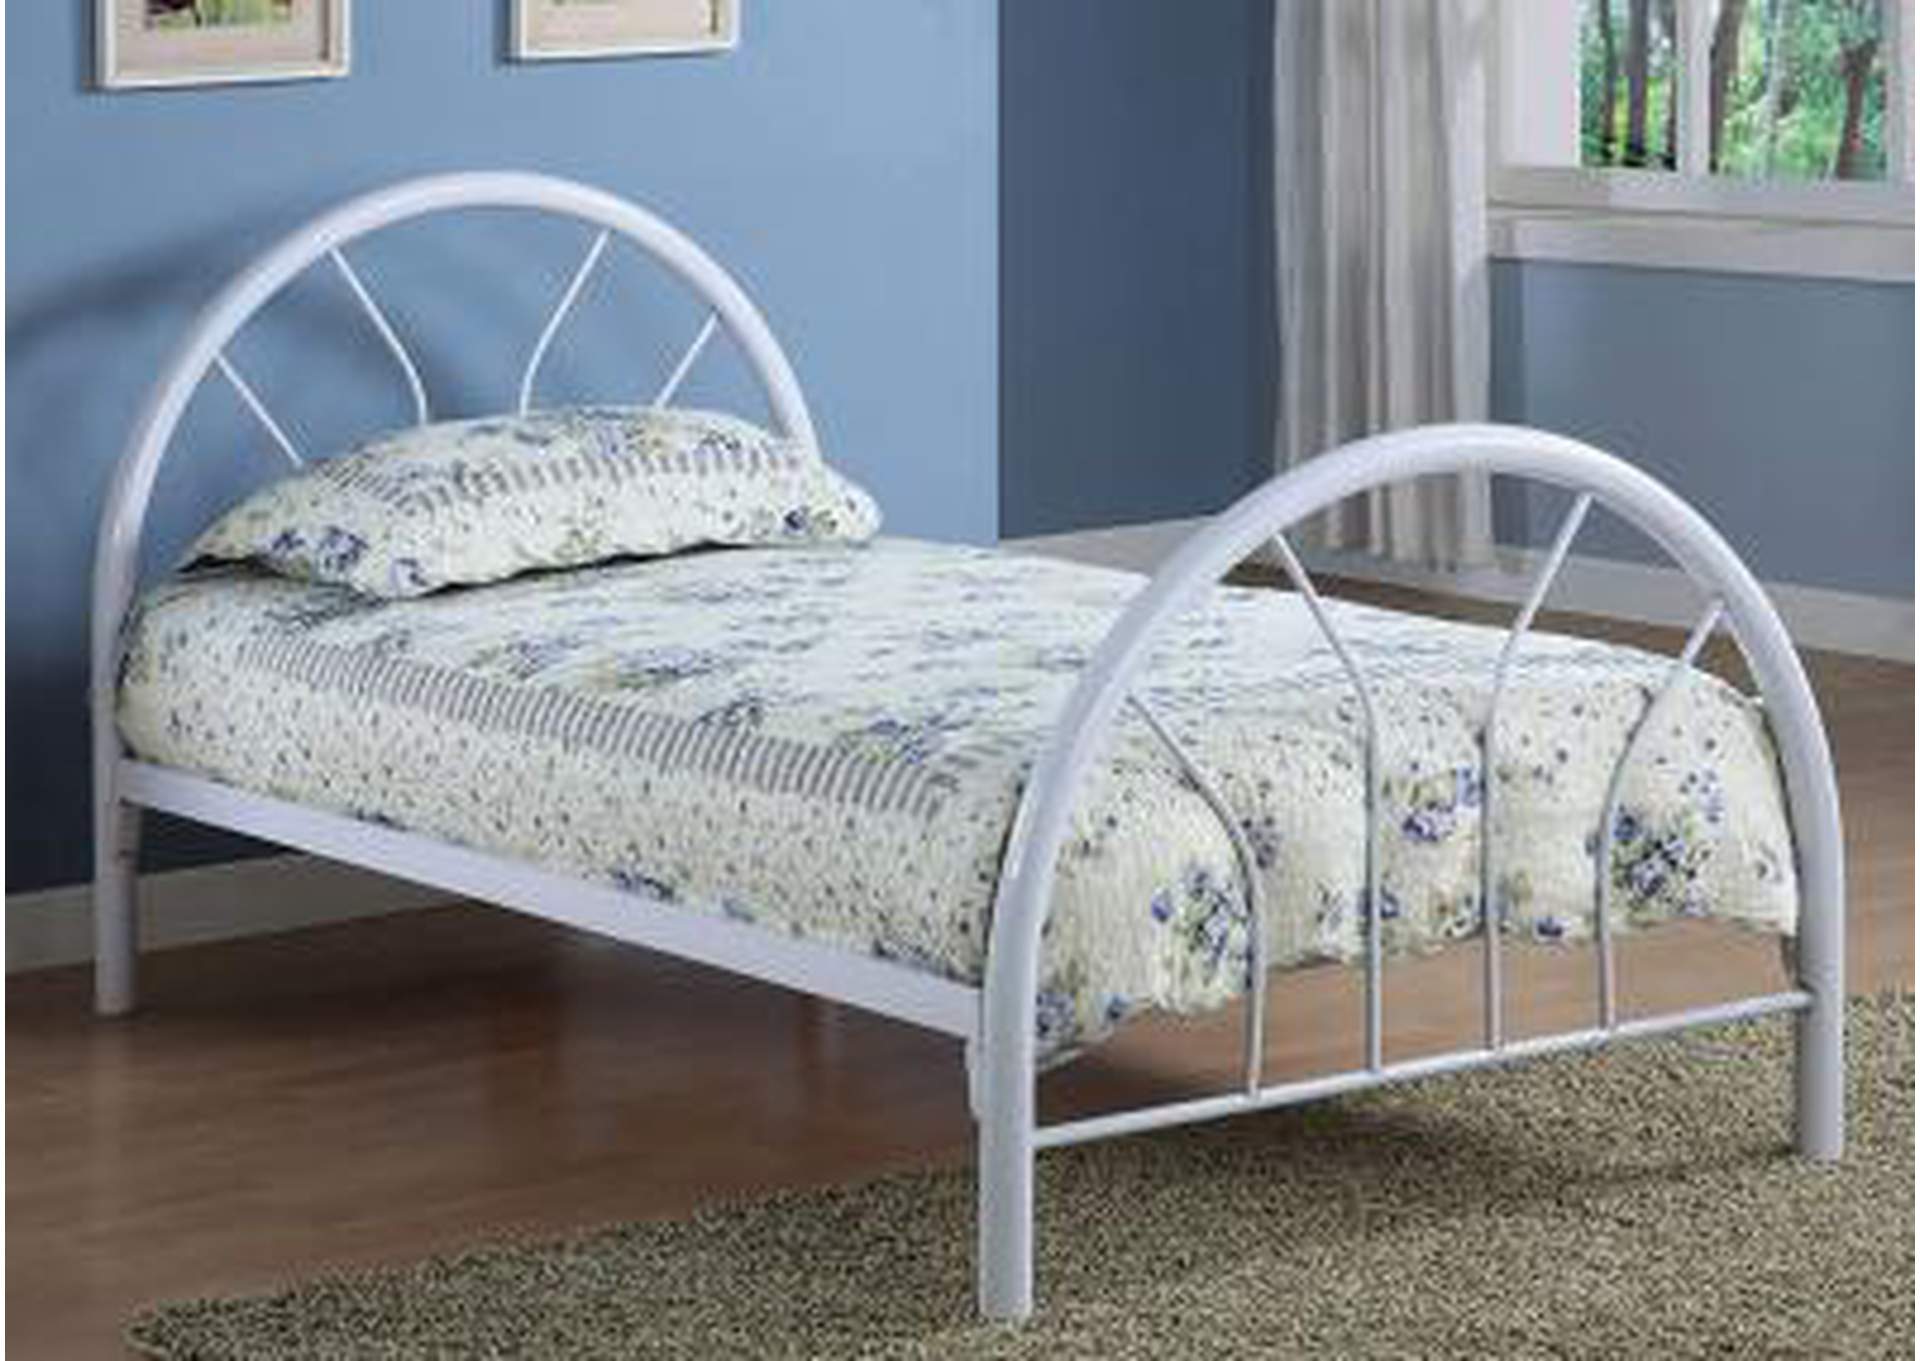 B984 Twin Bed,Nationwide